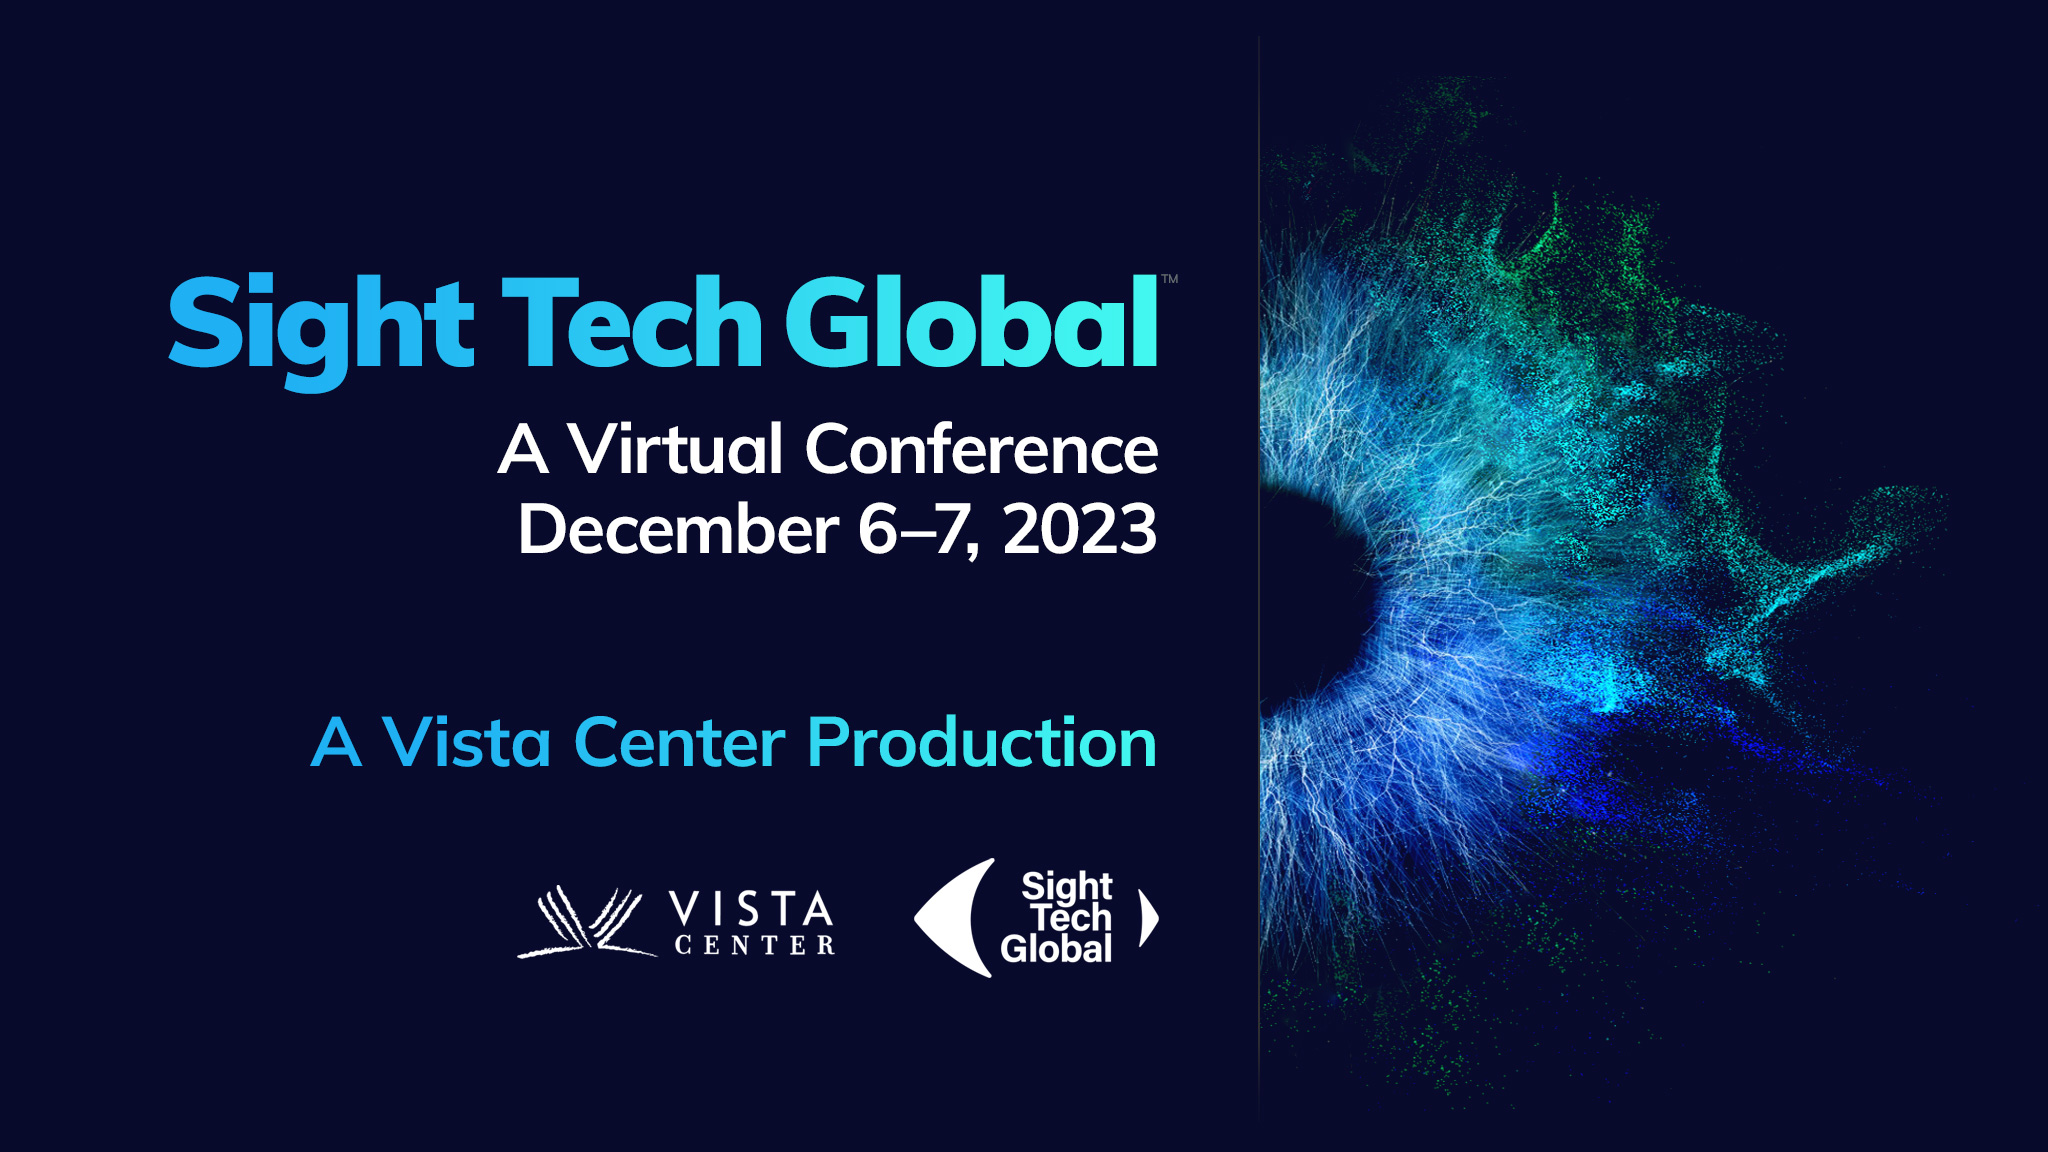 The image has a background with a stylized illustration of an eye in various shades of blue. The text reads Sight Tech Global, A Virtual Conference, Dec. 6-7, 2023, A Vista Center Production.